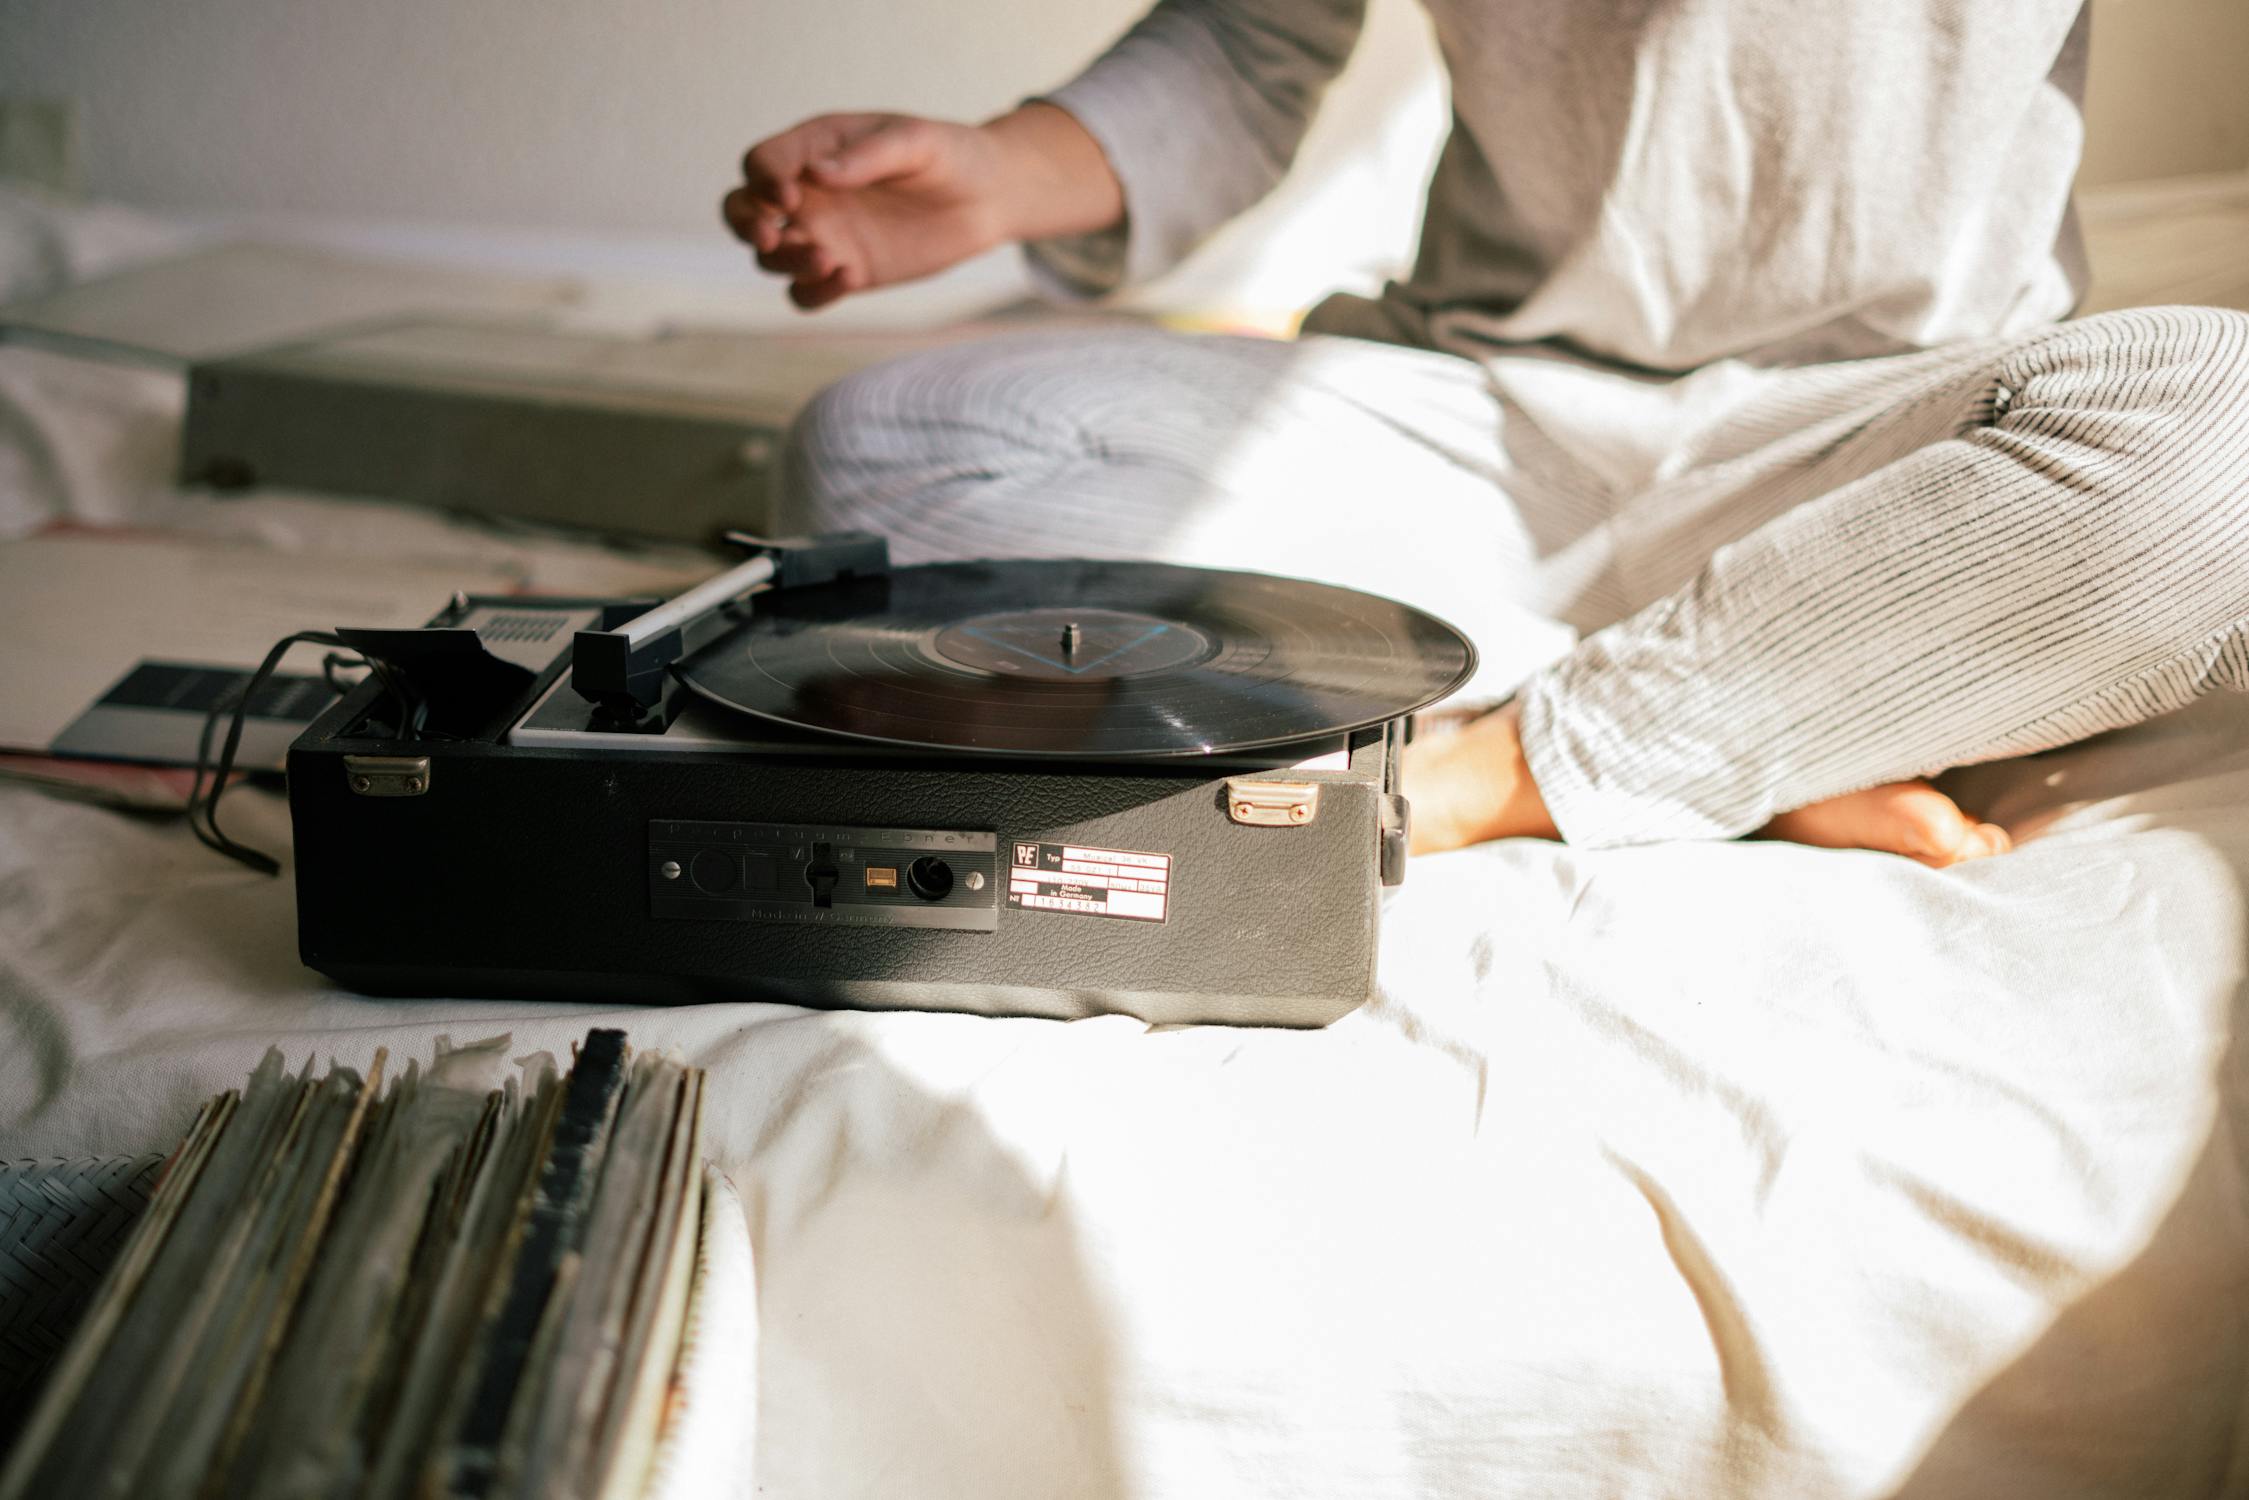 A record player sits on a bed.